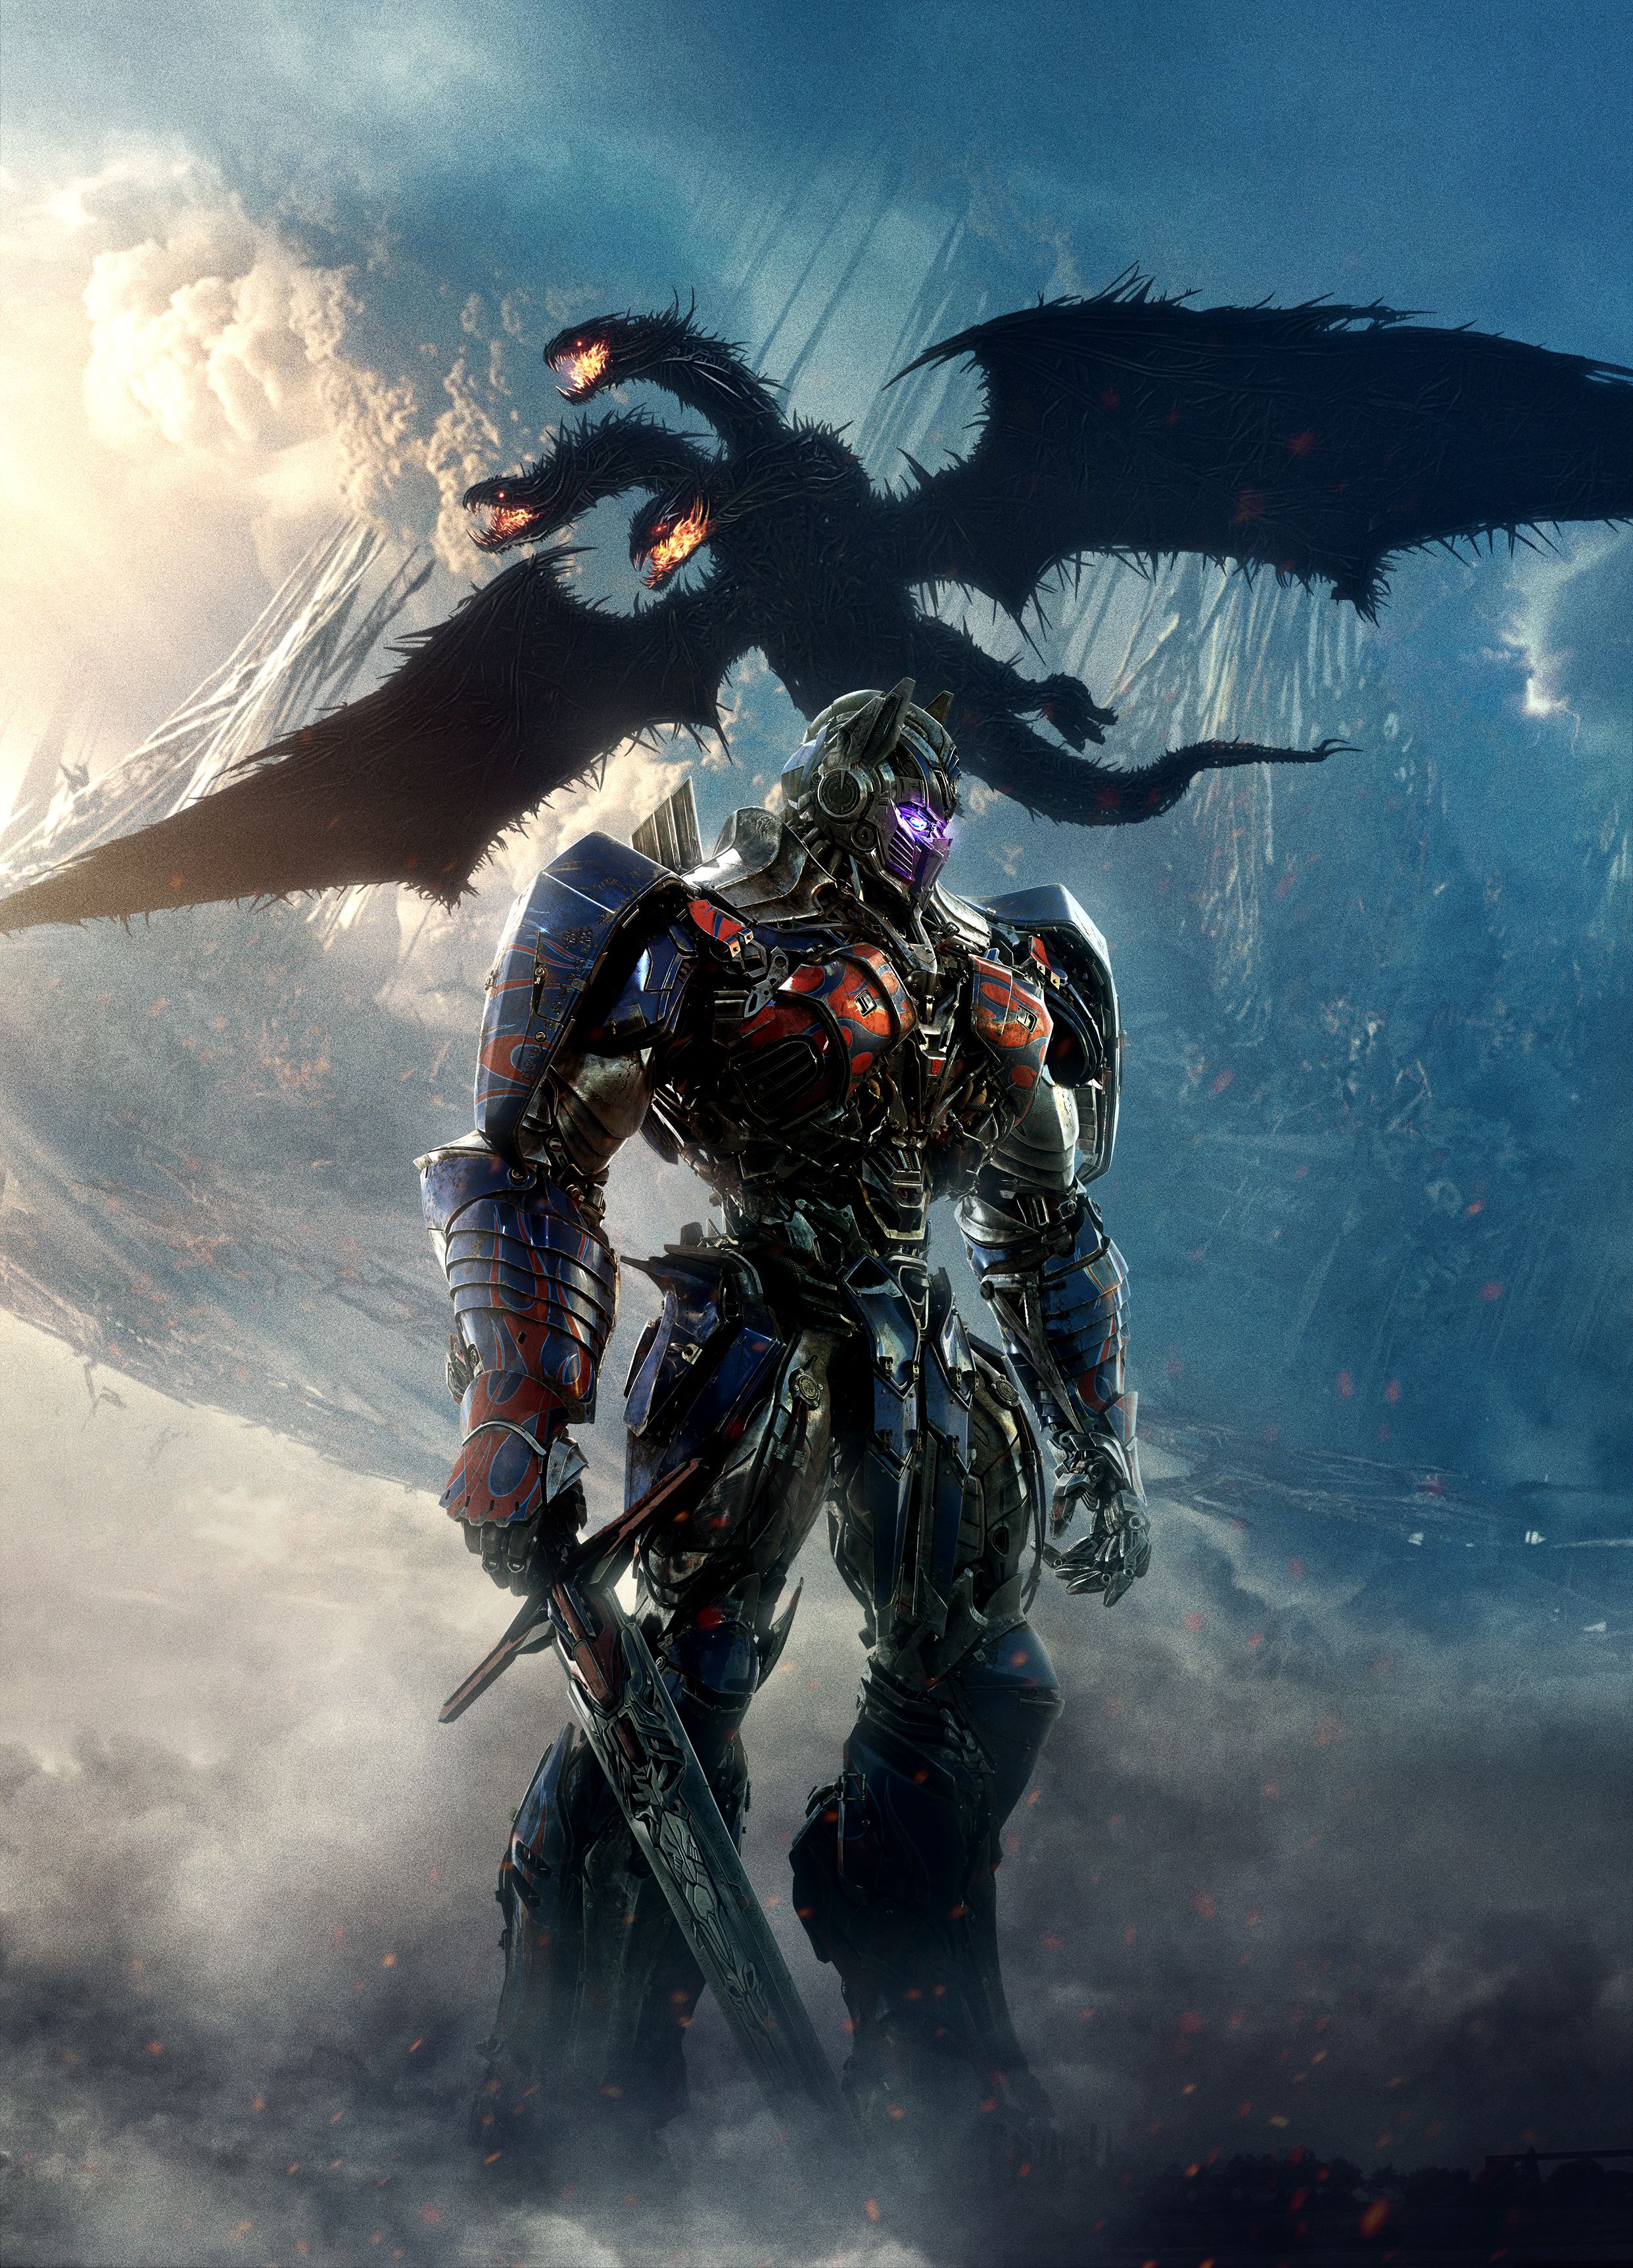 Wallpaper Transformers: The Last Knight, Optimus Prime, HD, Movies,. Wallpaper for iPhone, Android, Mobile and Desktop